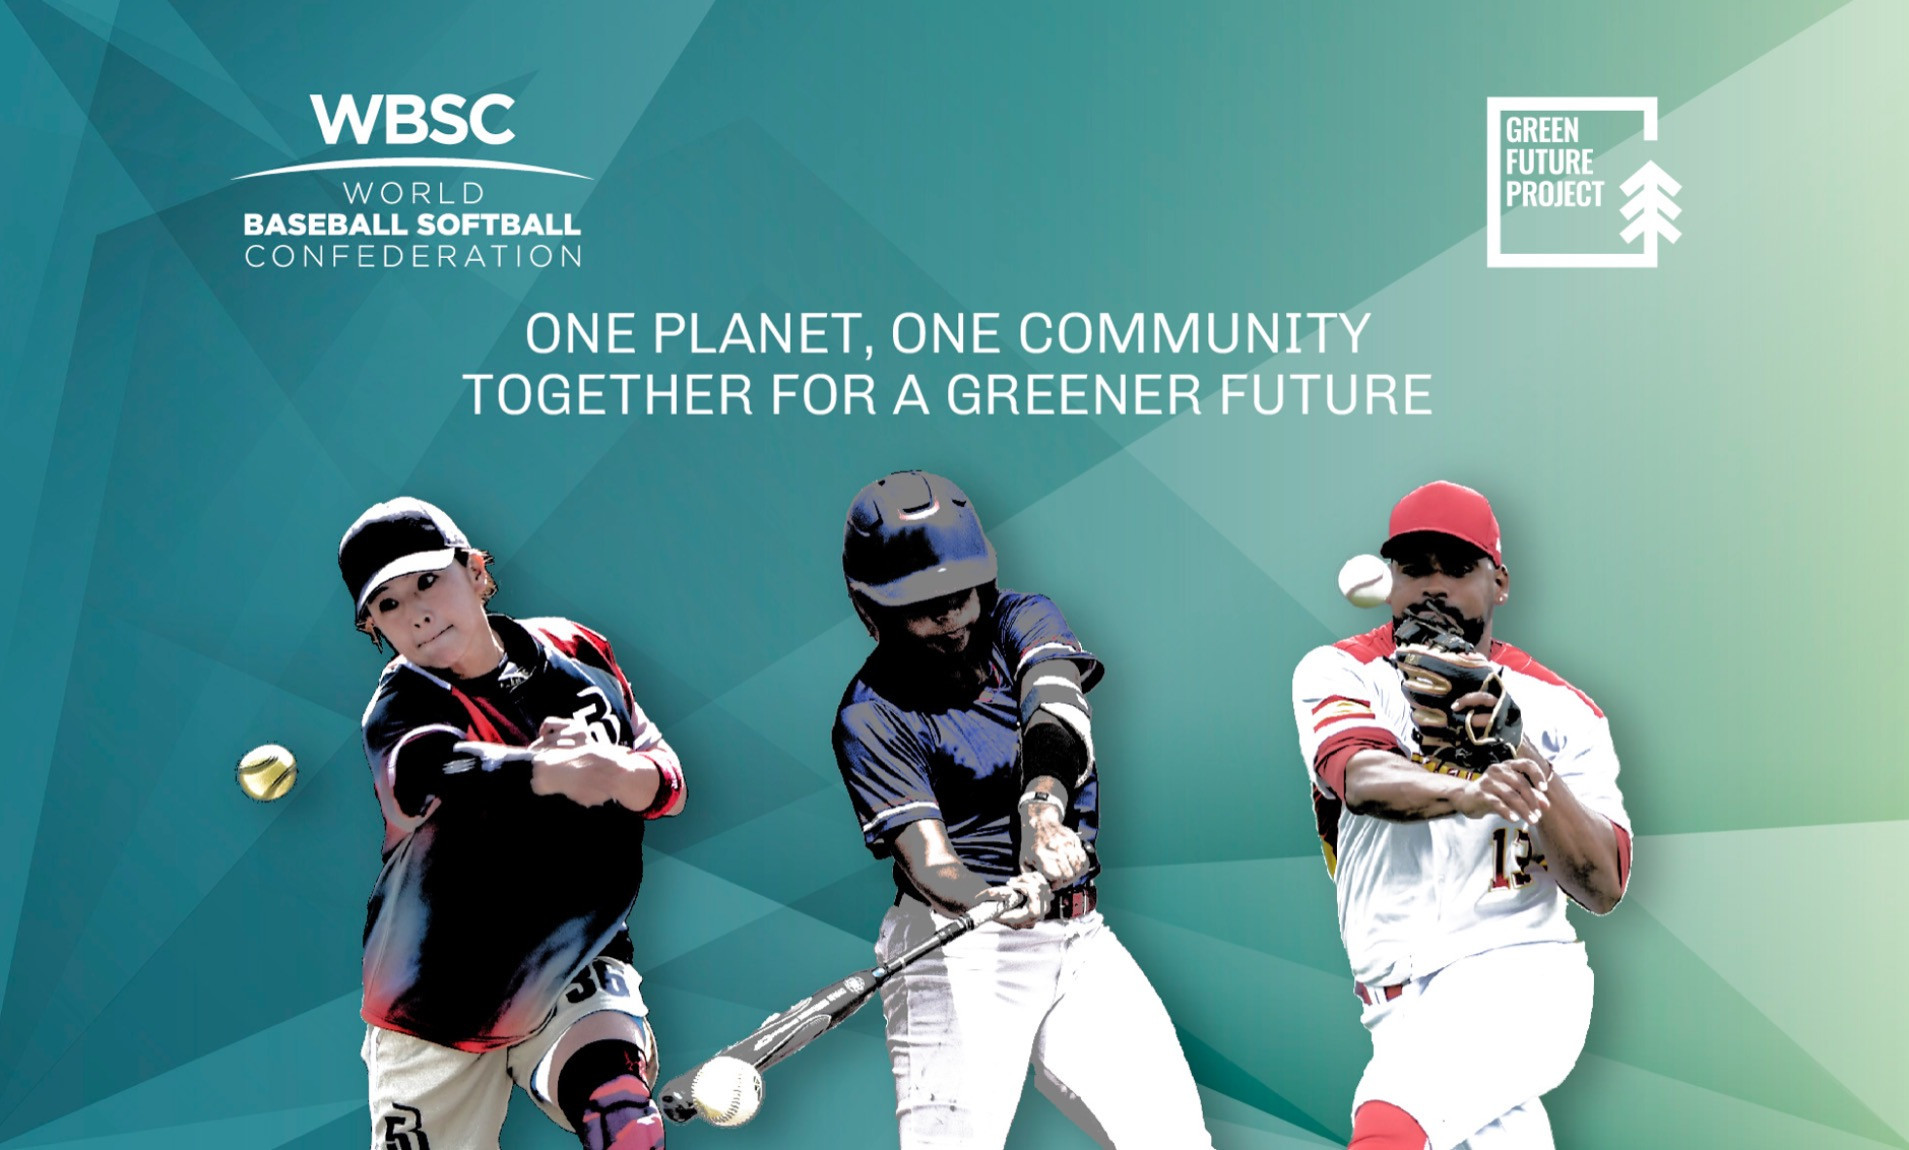 WBSC enters partnership with Green Future Project to help reduce emissions